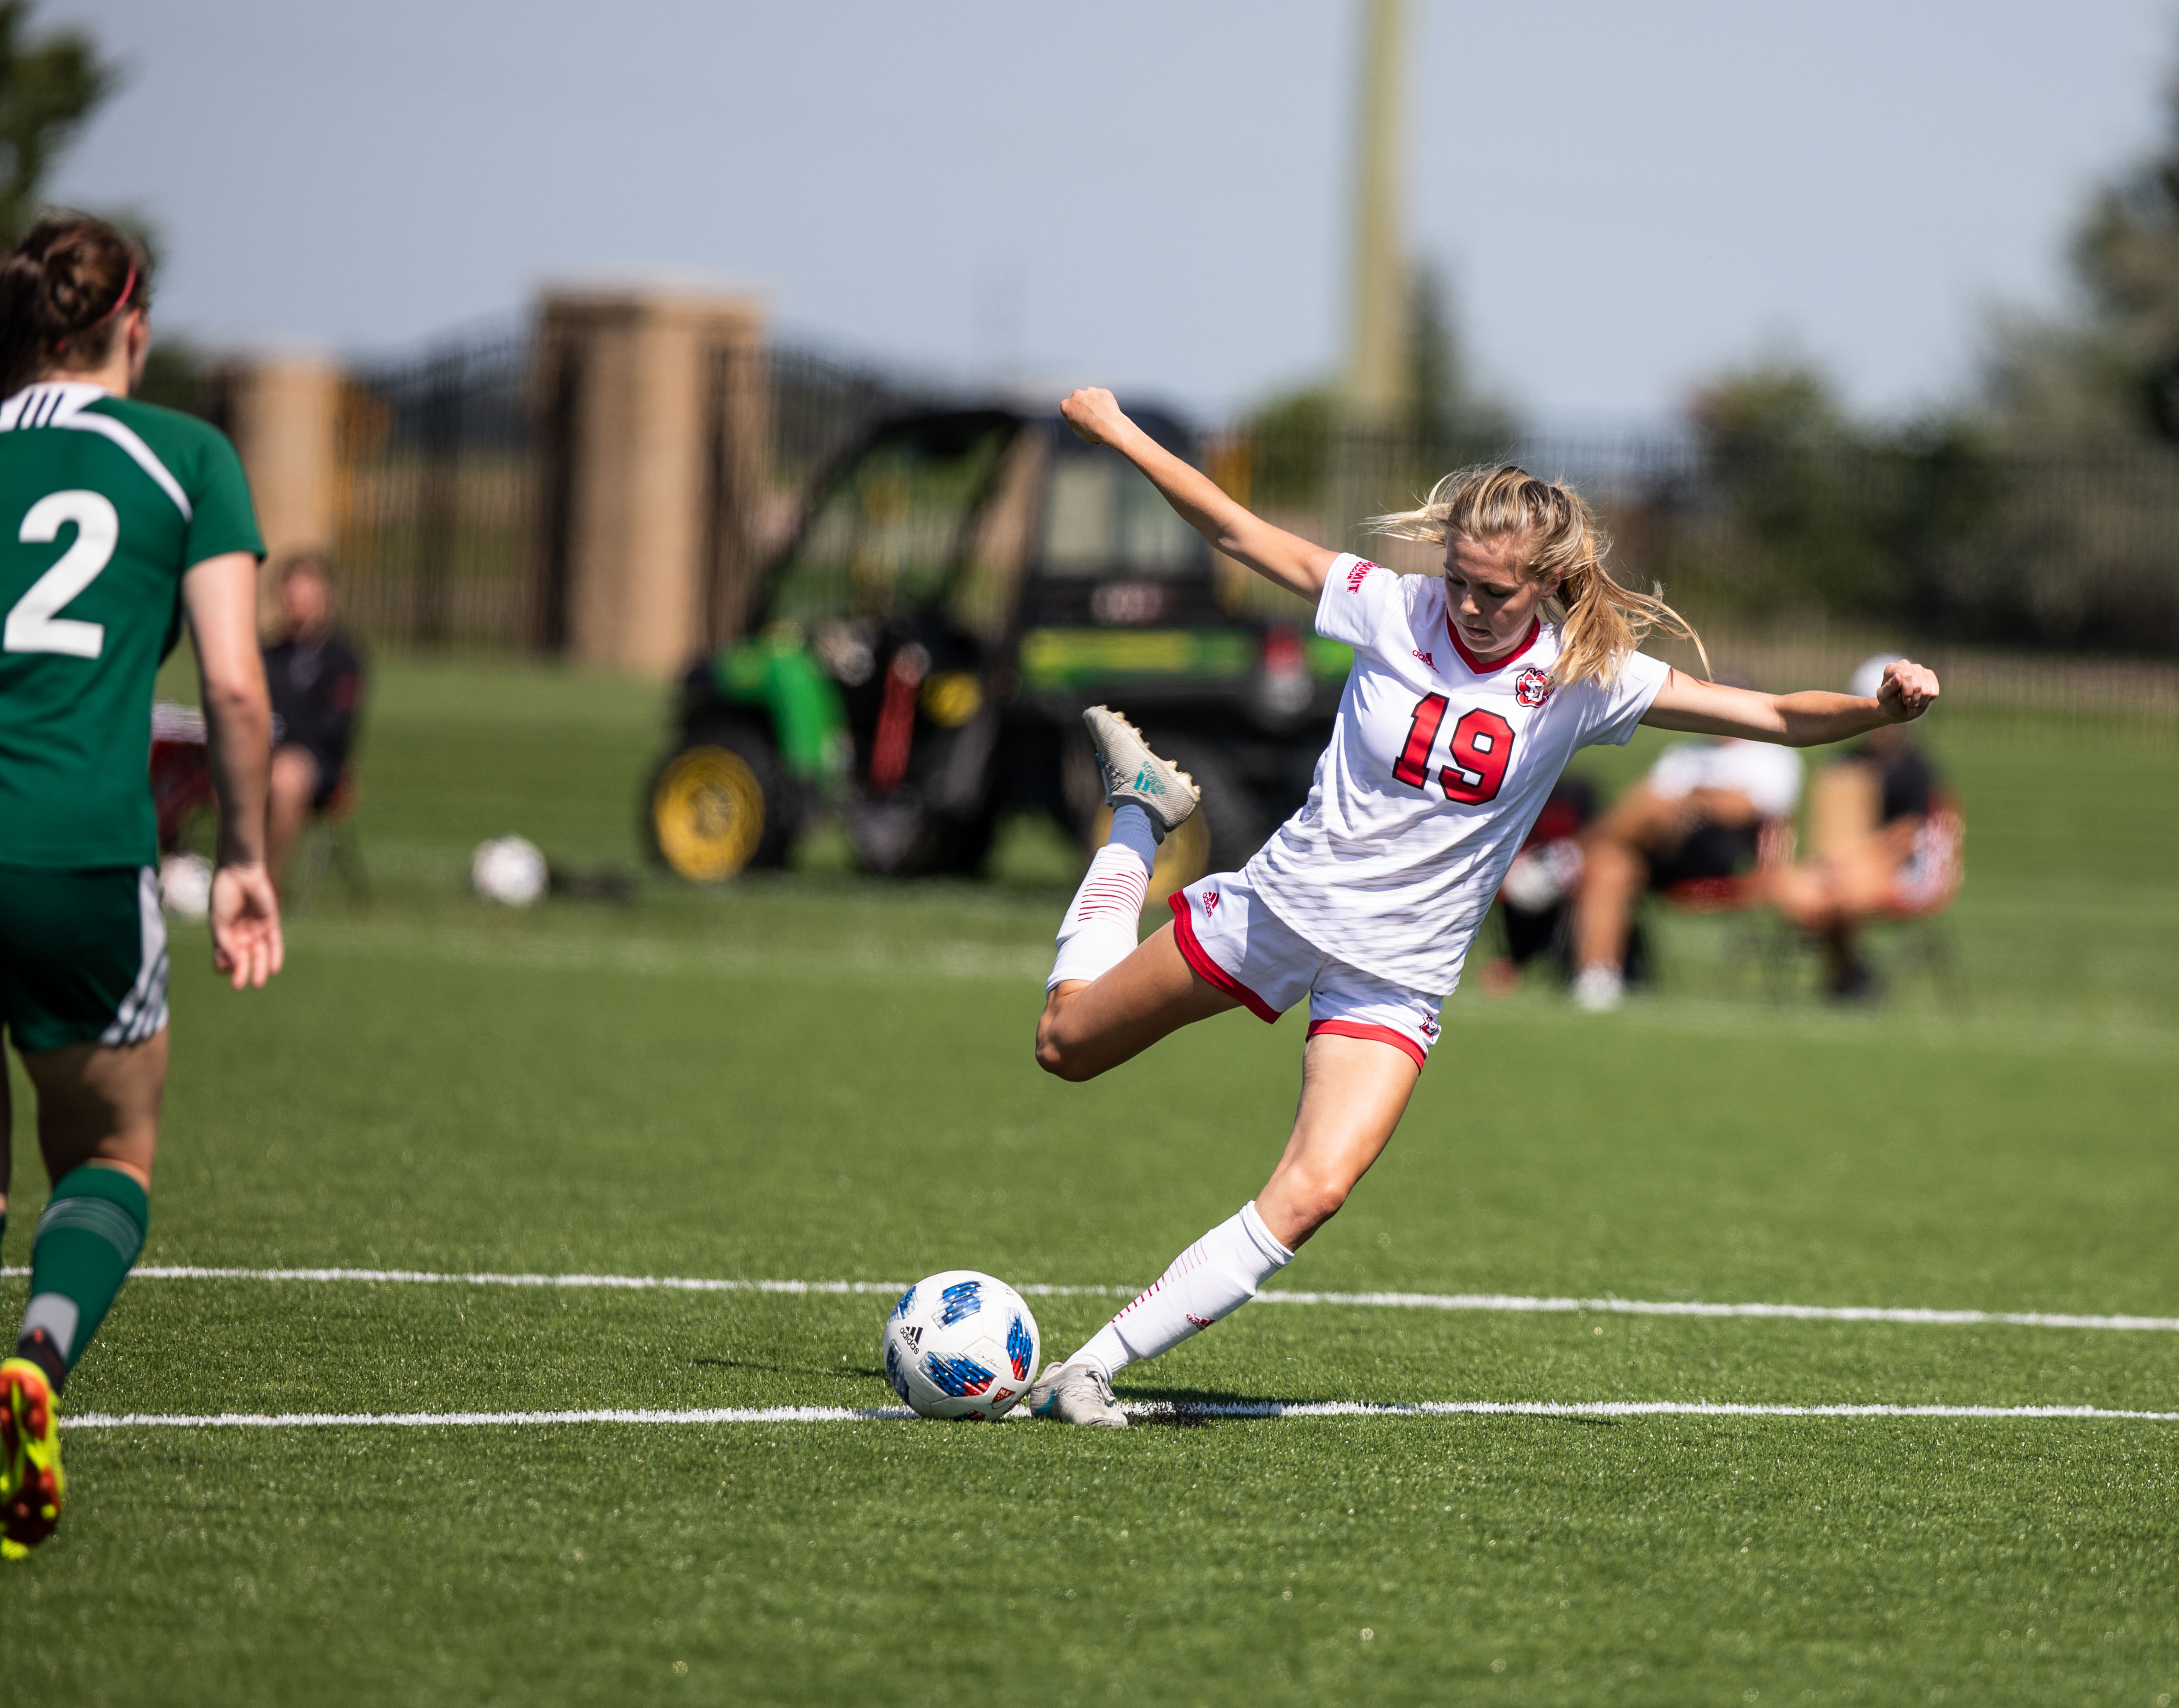 Coyote soccer loses to Creighton, rebounds against Green Bay